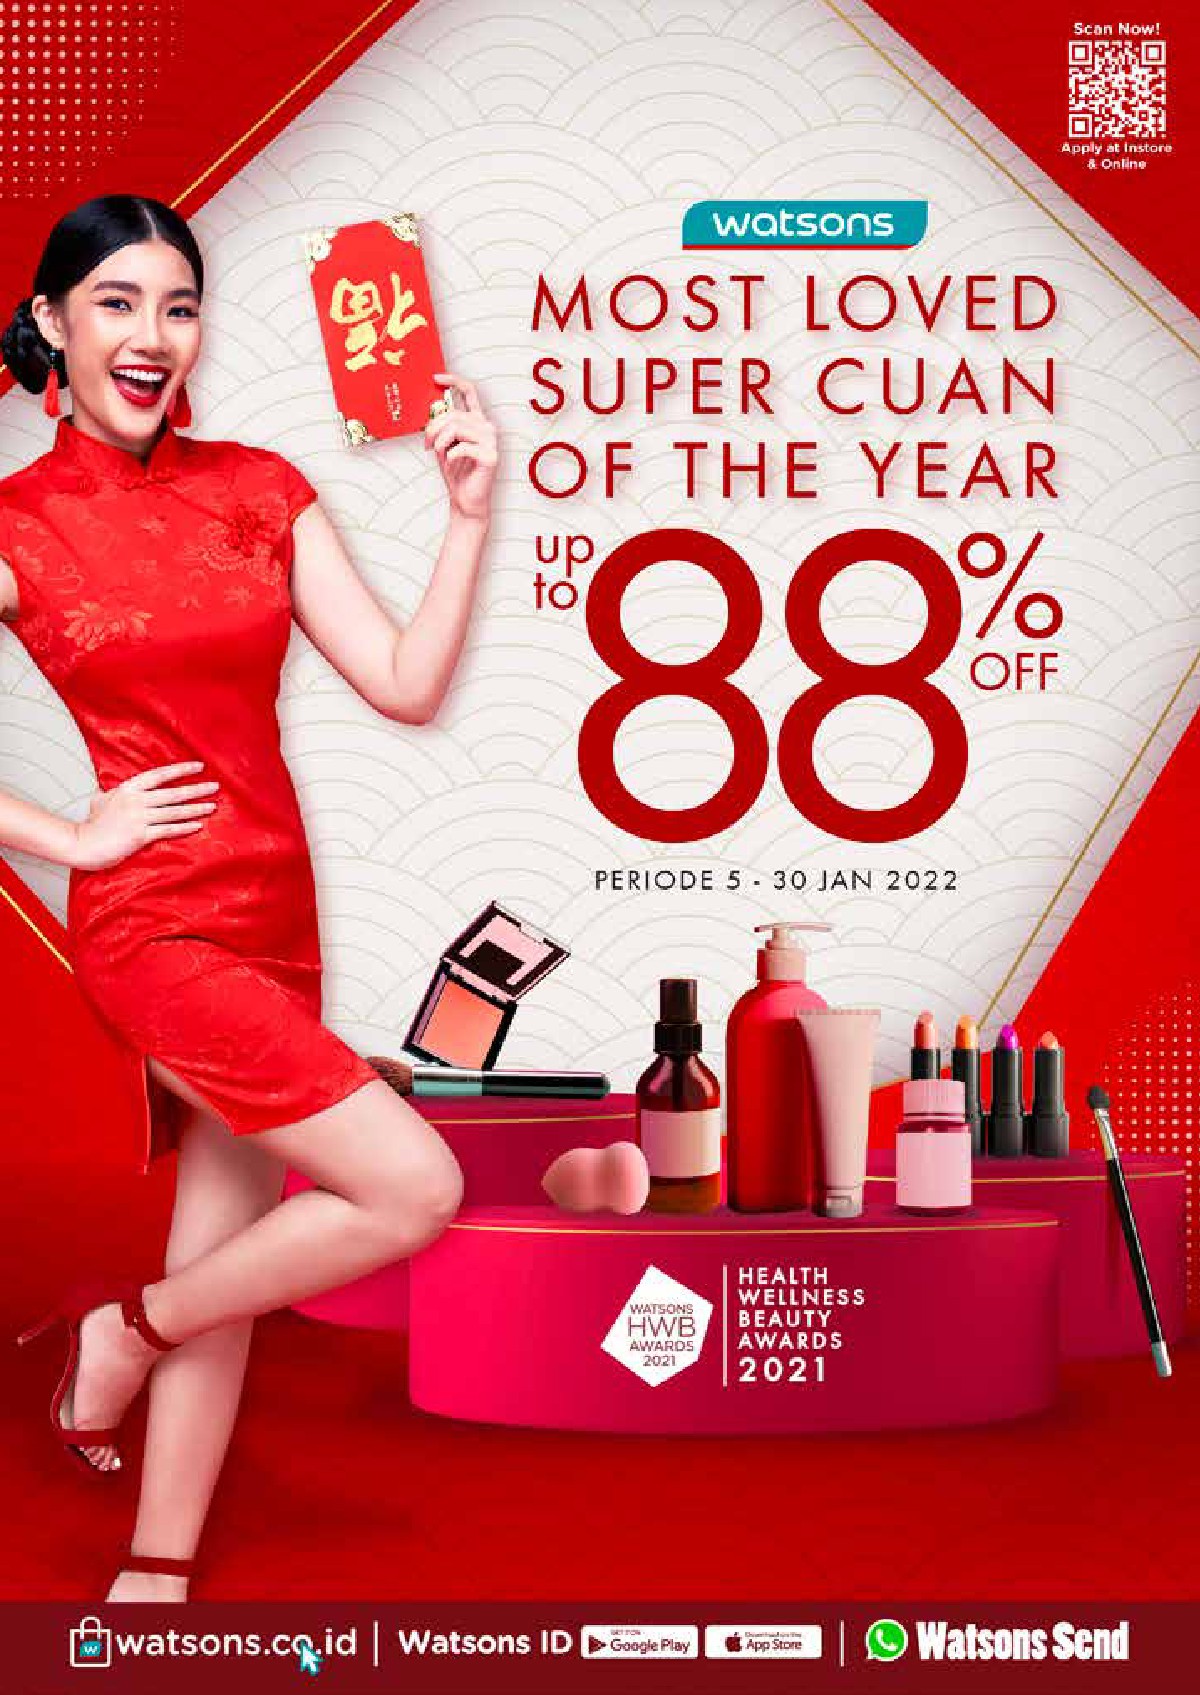 Katalog Belanja Watsons Terbaru - Most Loved Super Cuan of The Year | Discount Up to 88% on your favorite products